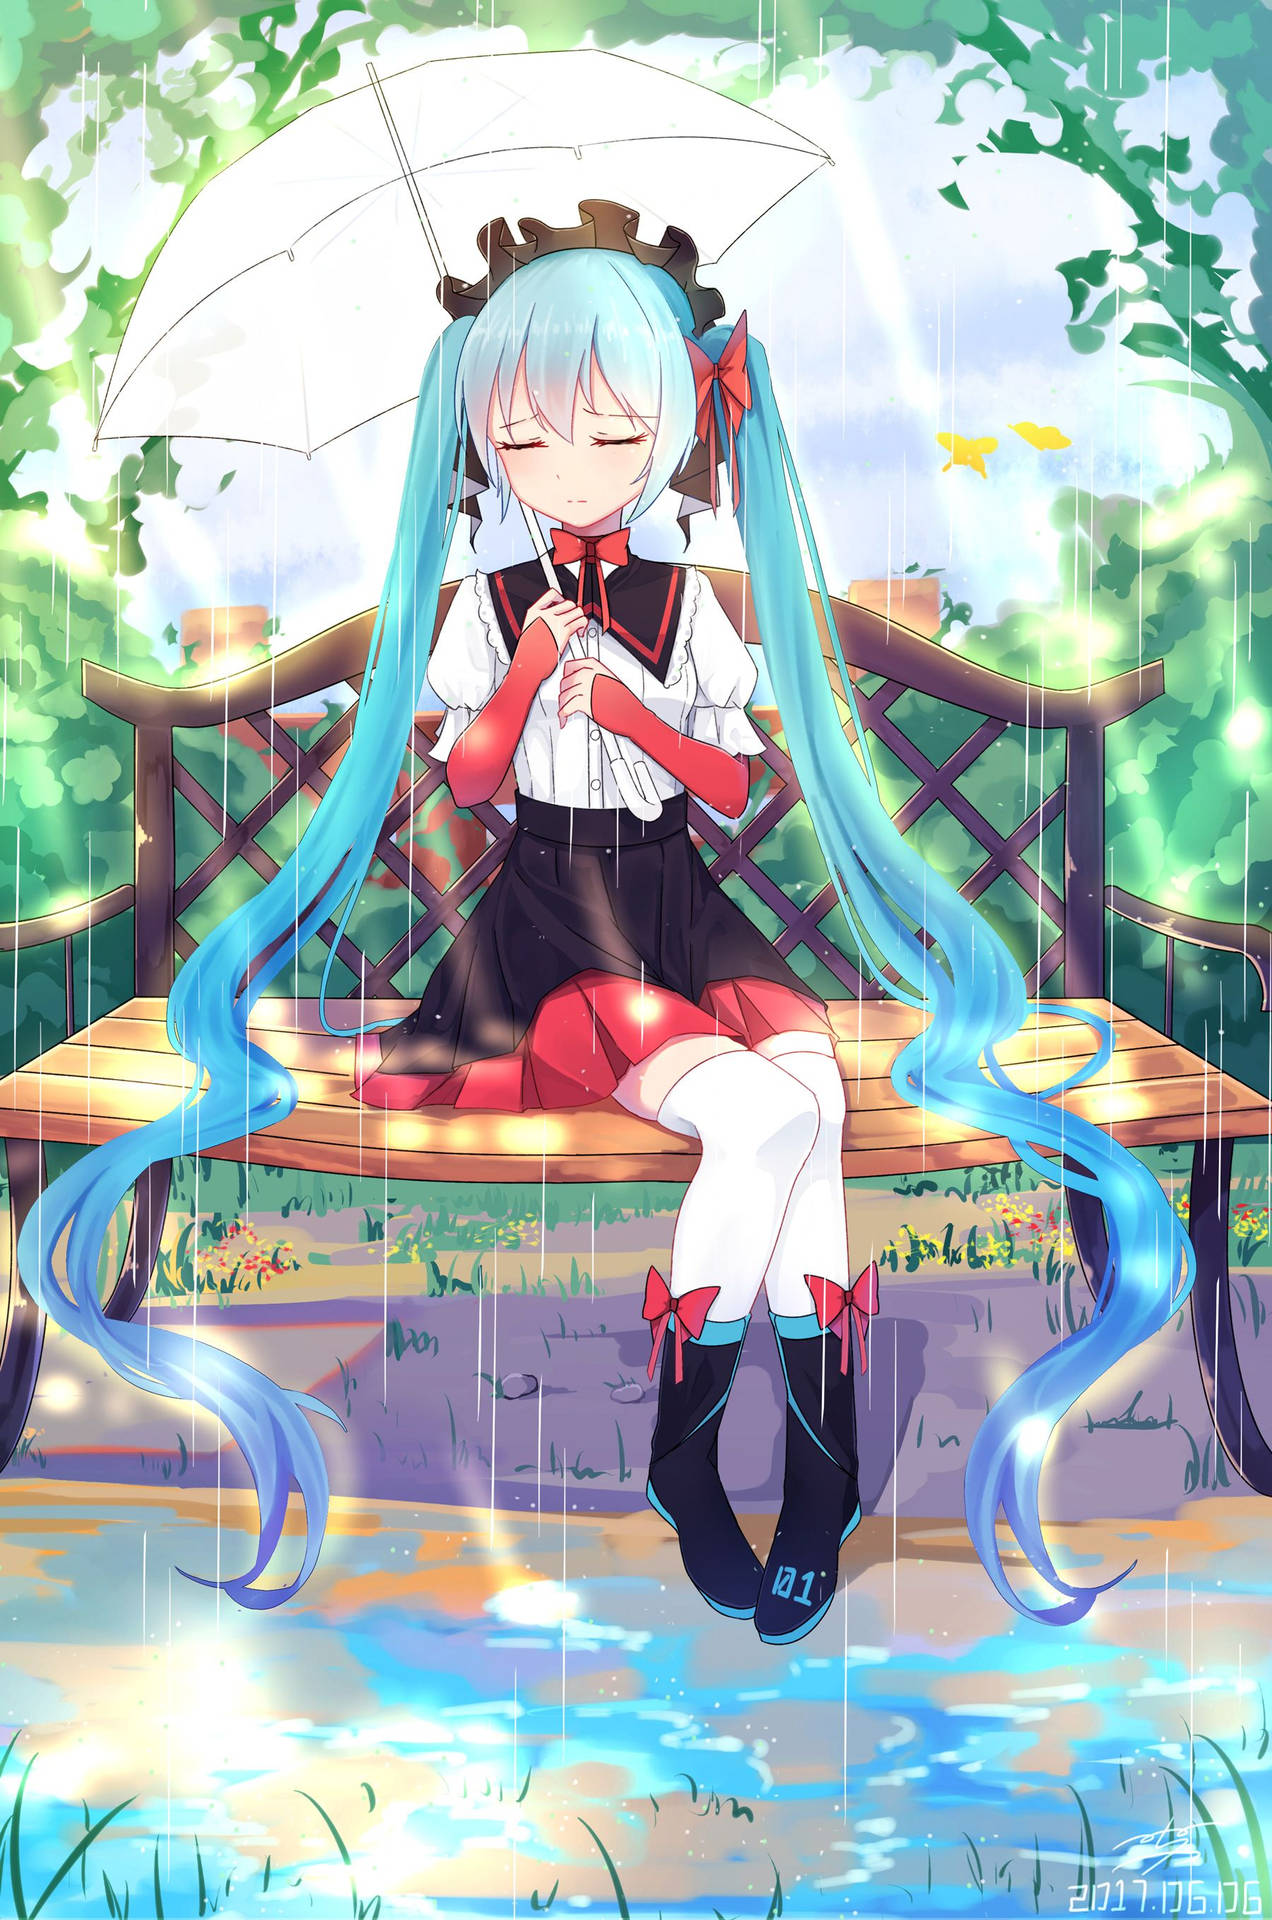 Hatsune Miku looks sad as she stares wistfully into the distance. Wallpaper